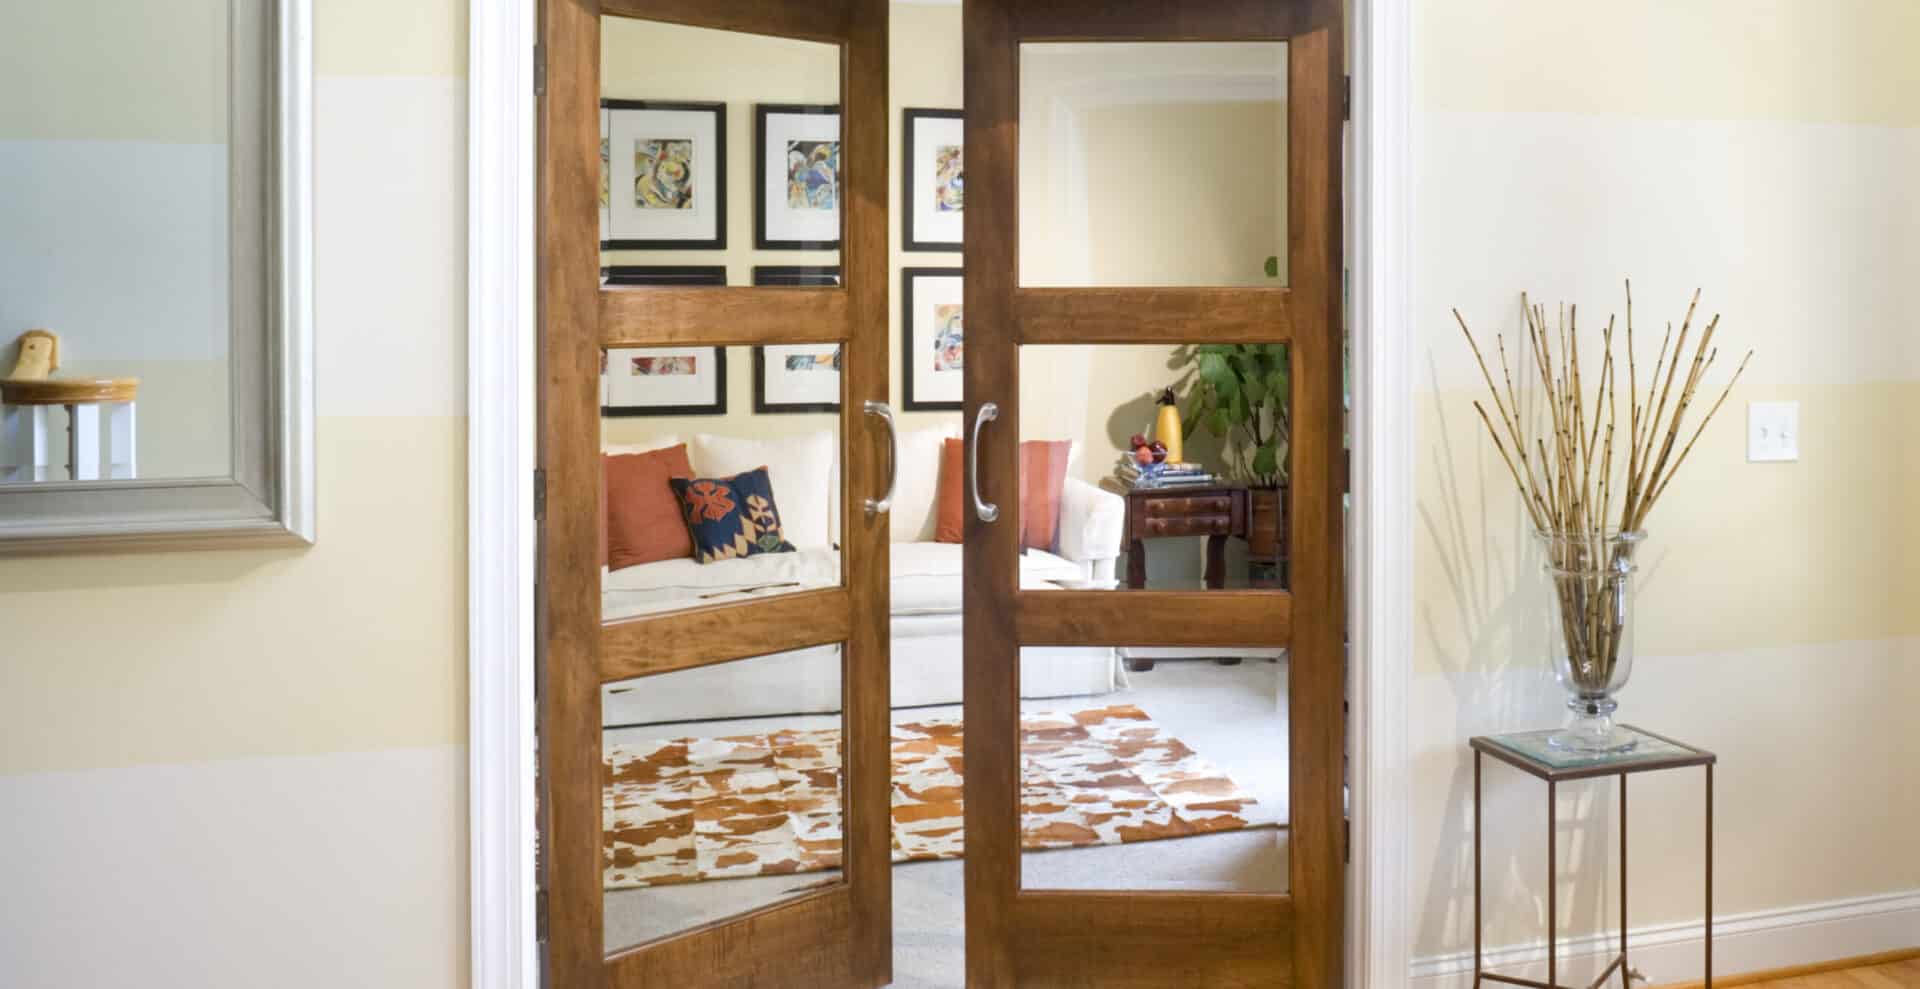 interior doors manufacturers at frankford and allegheny